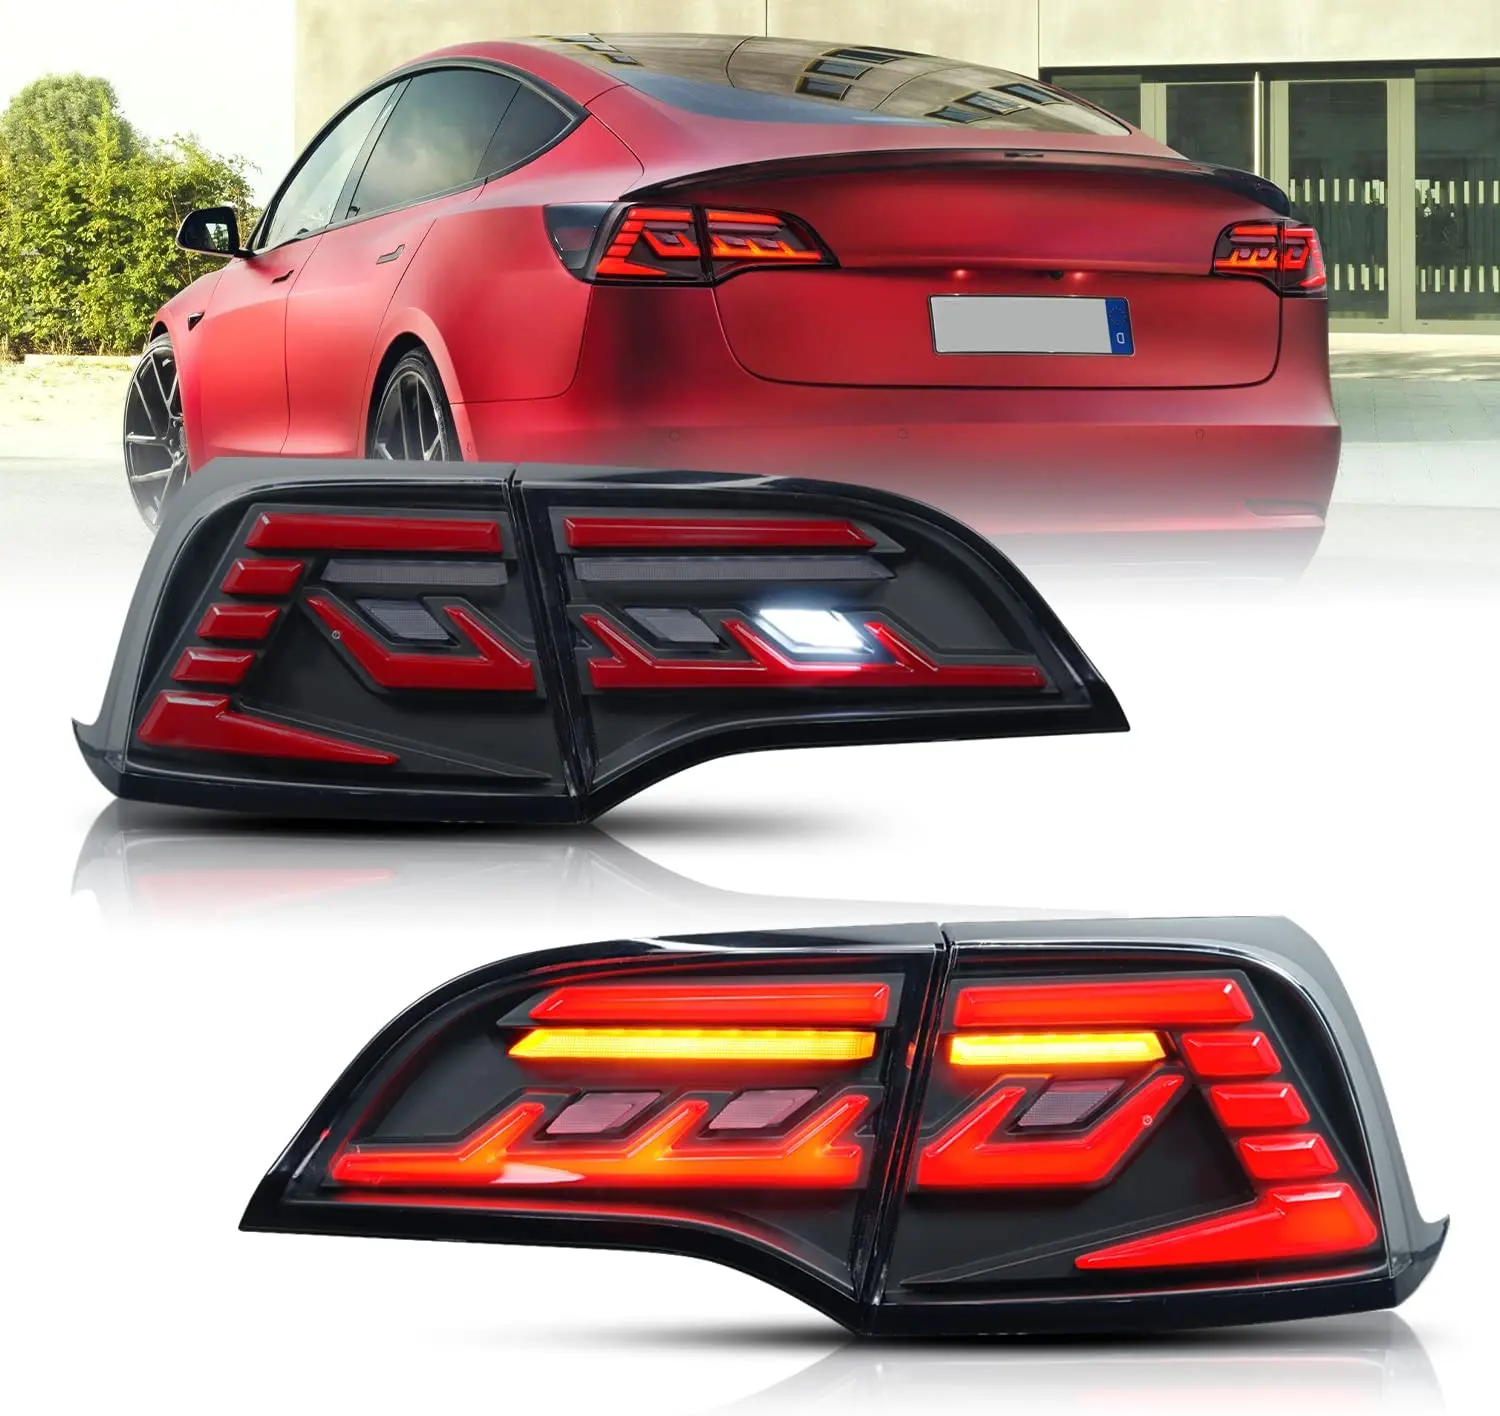 AIM9GT Sbbc1533a978c42b5899990344422330az LED Tail Lights Assembly for 2017-2022 Tesla Model 3 Model Y with Sequential Turn Signal Start up Animation Tail Lamp  